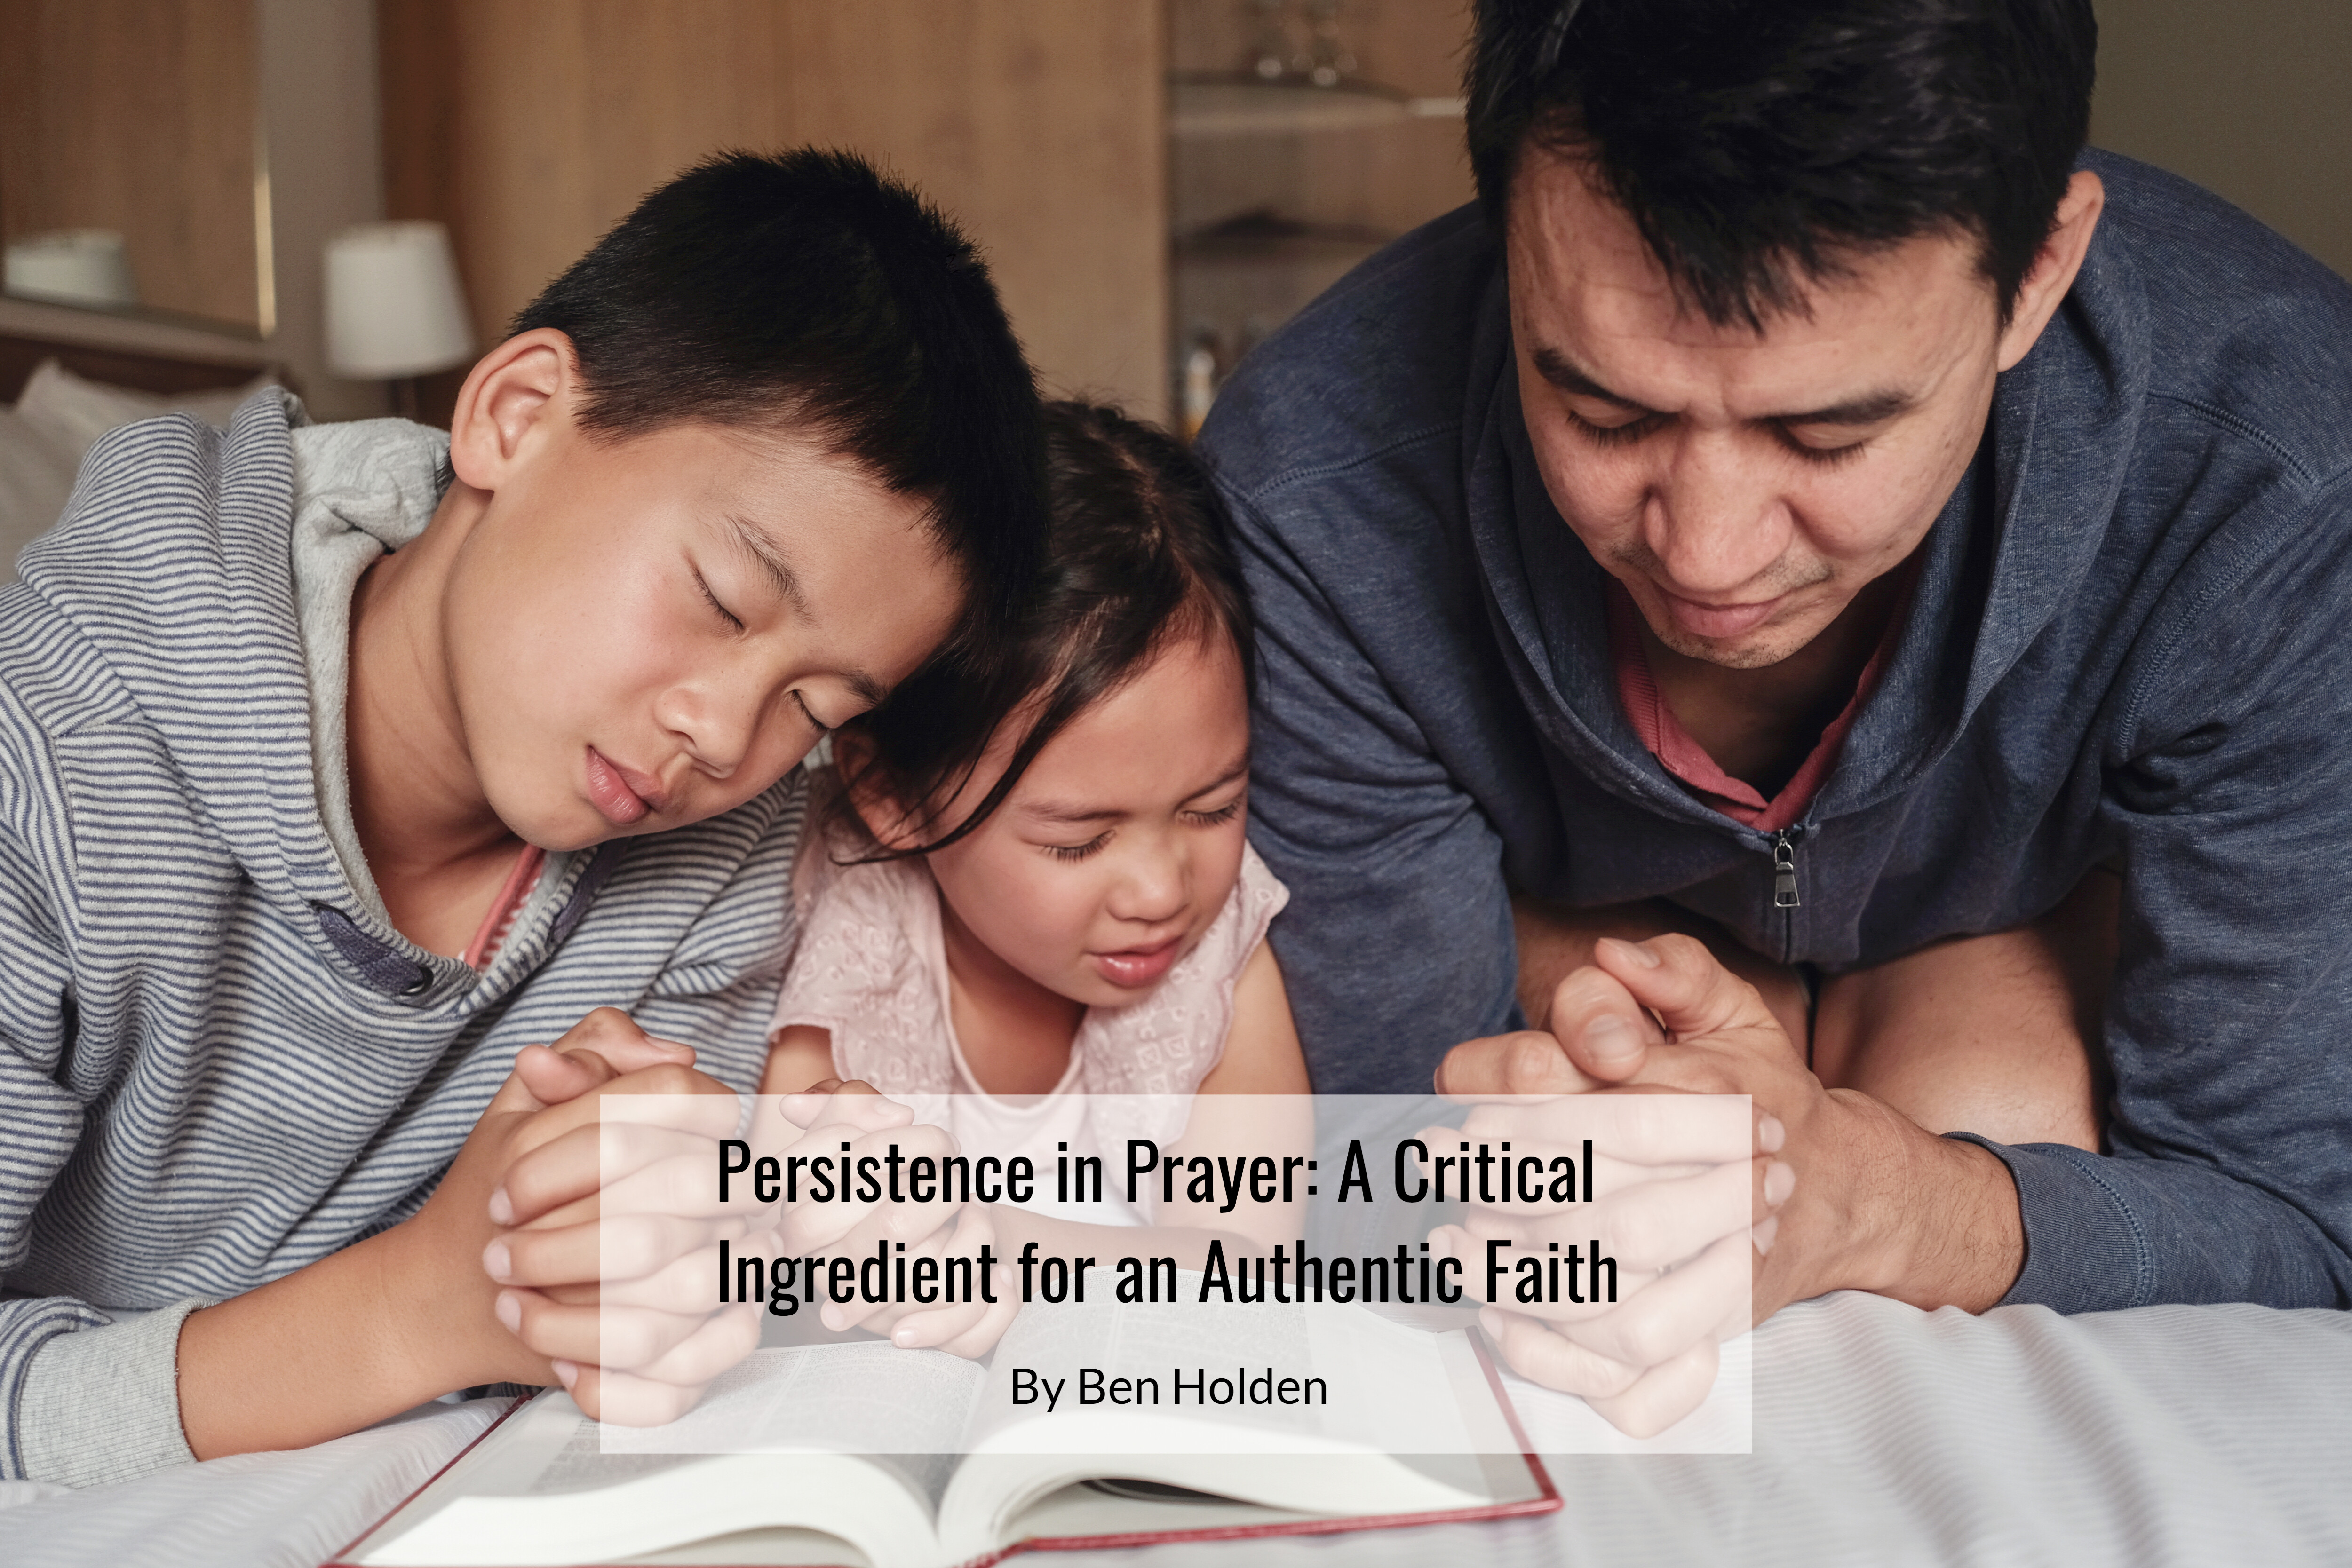 Persistence in Prayer: A Critical Ingredient for an Authentic Faith